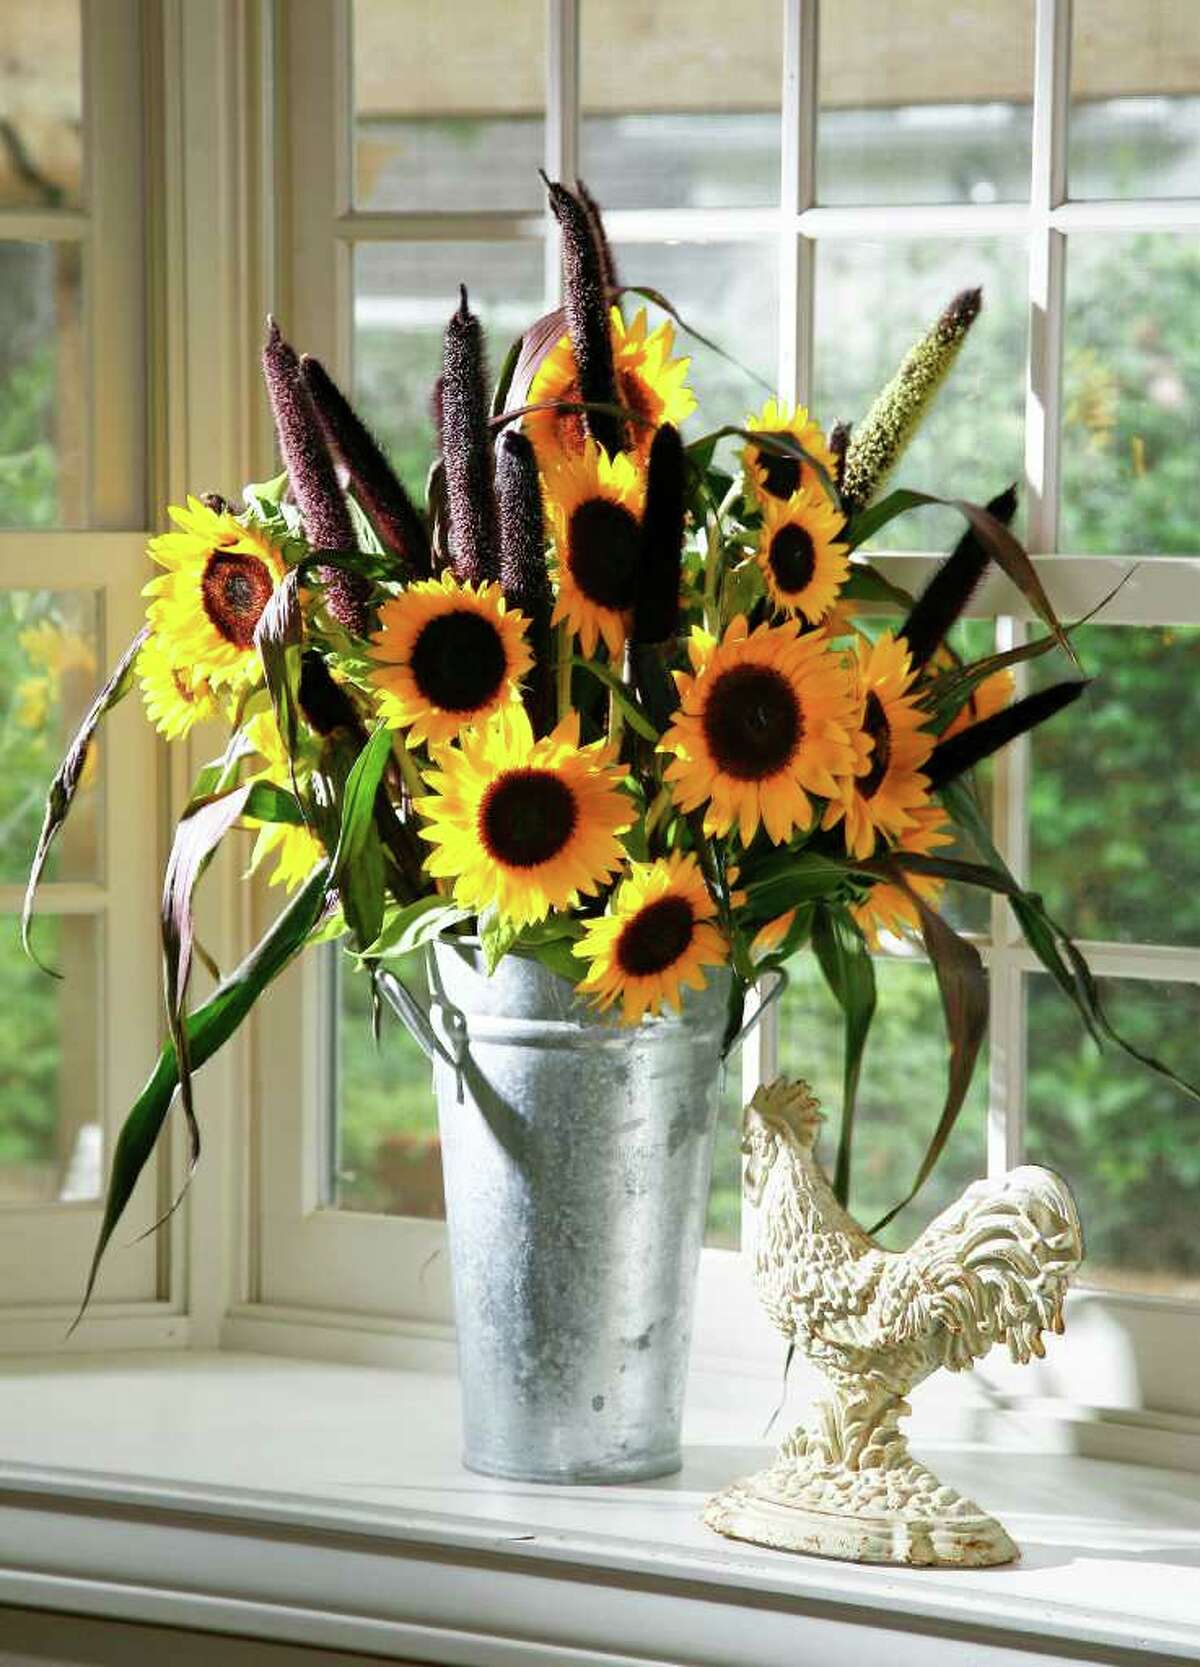 Three ways to decorate with sunflowers